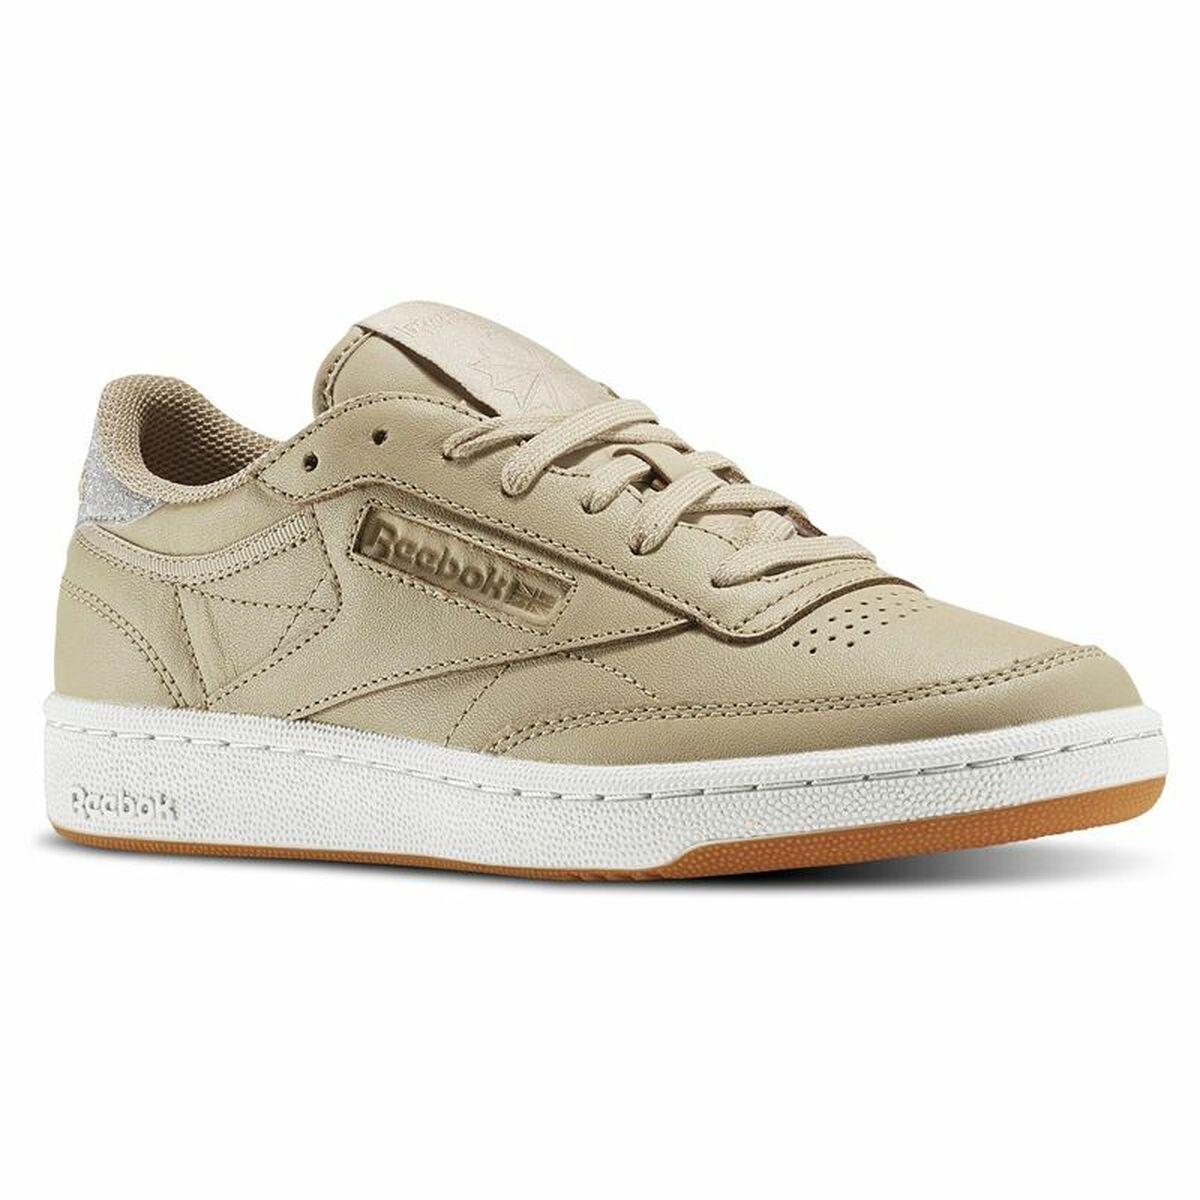 Reebok Sports Trainers For Women Classic Club C Diamond Beige in Natural |  Lyst